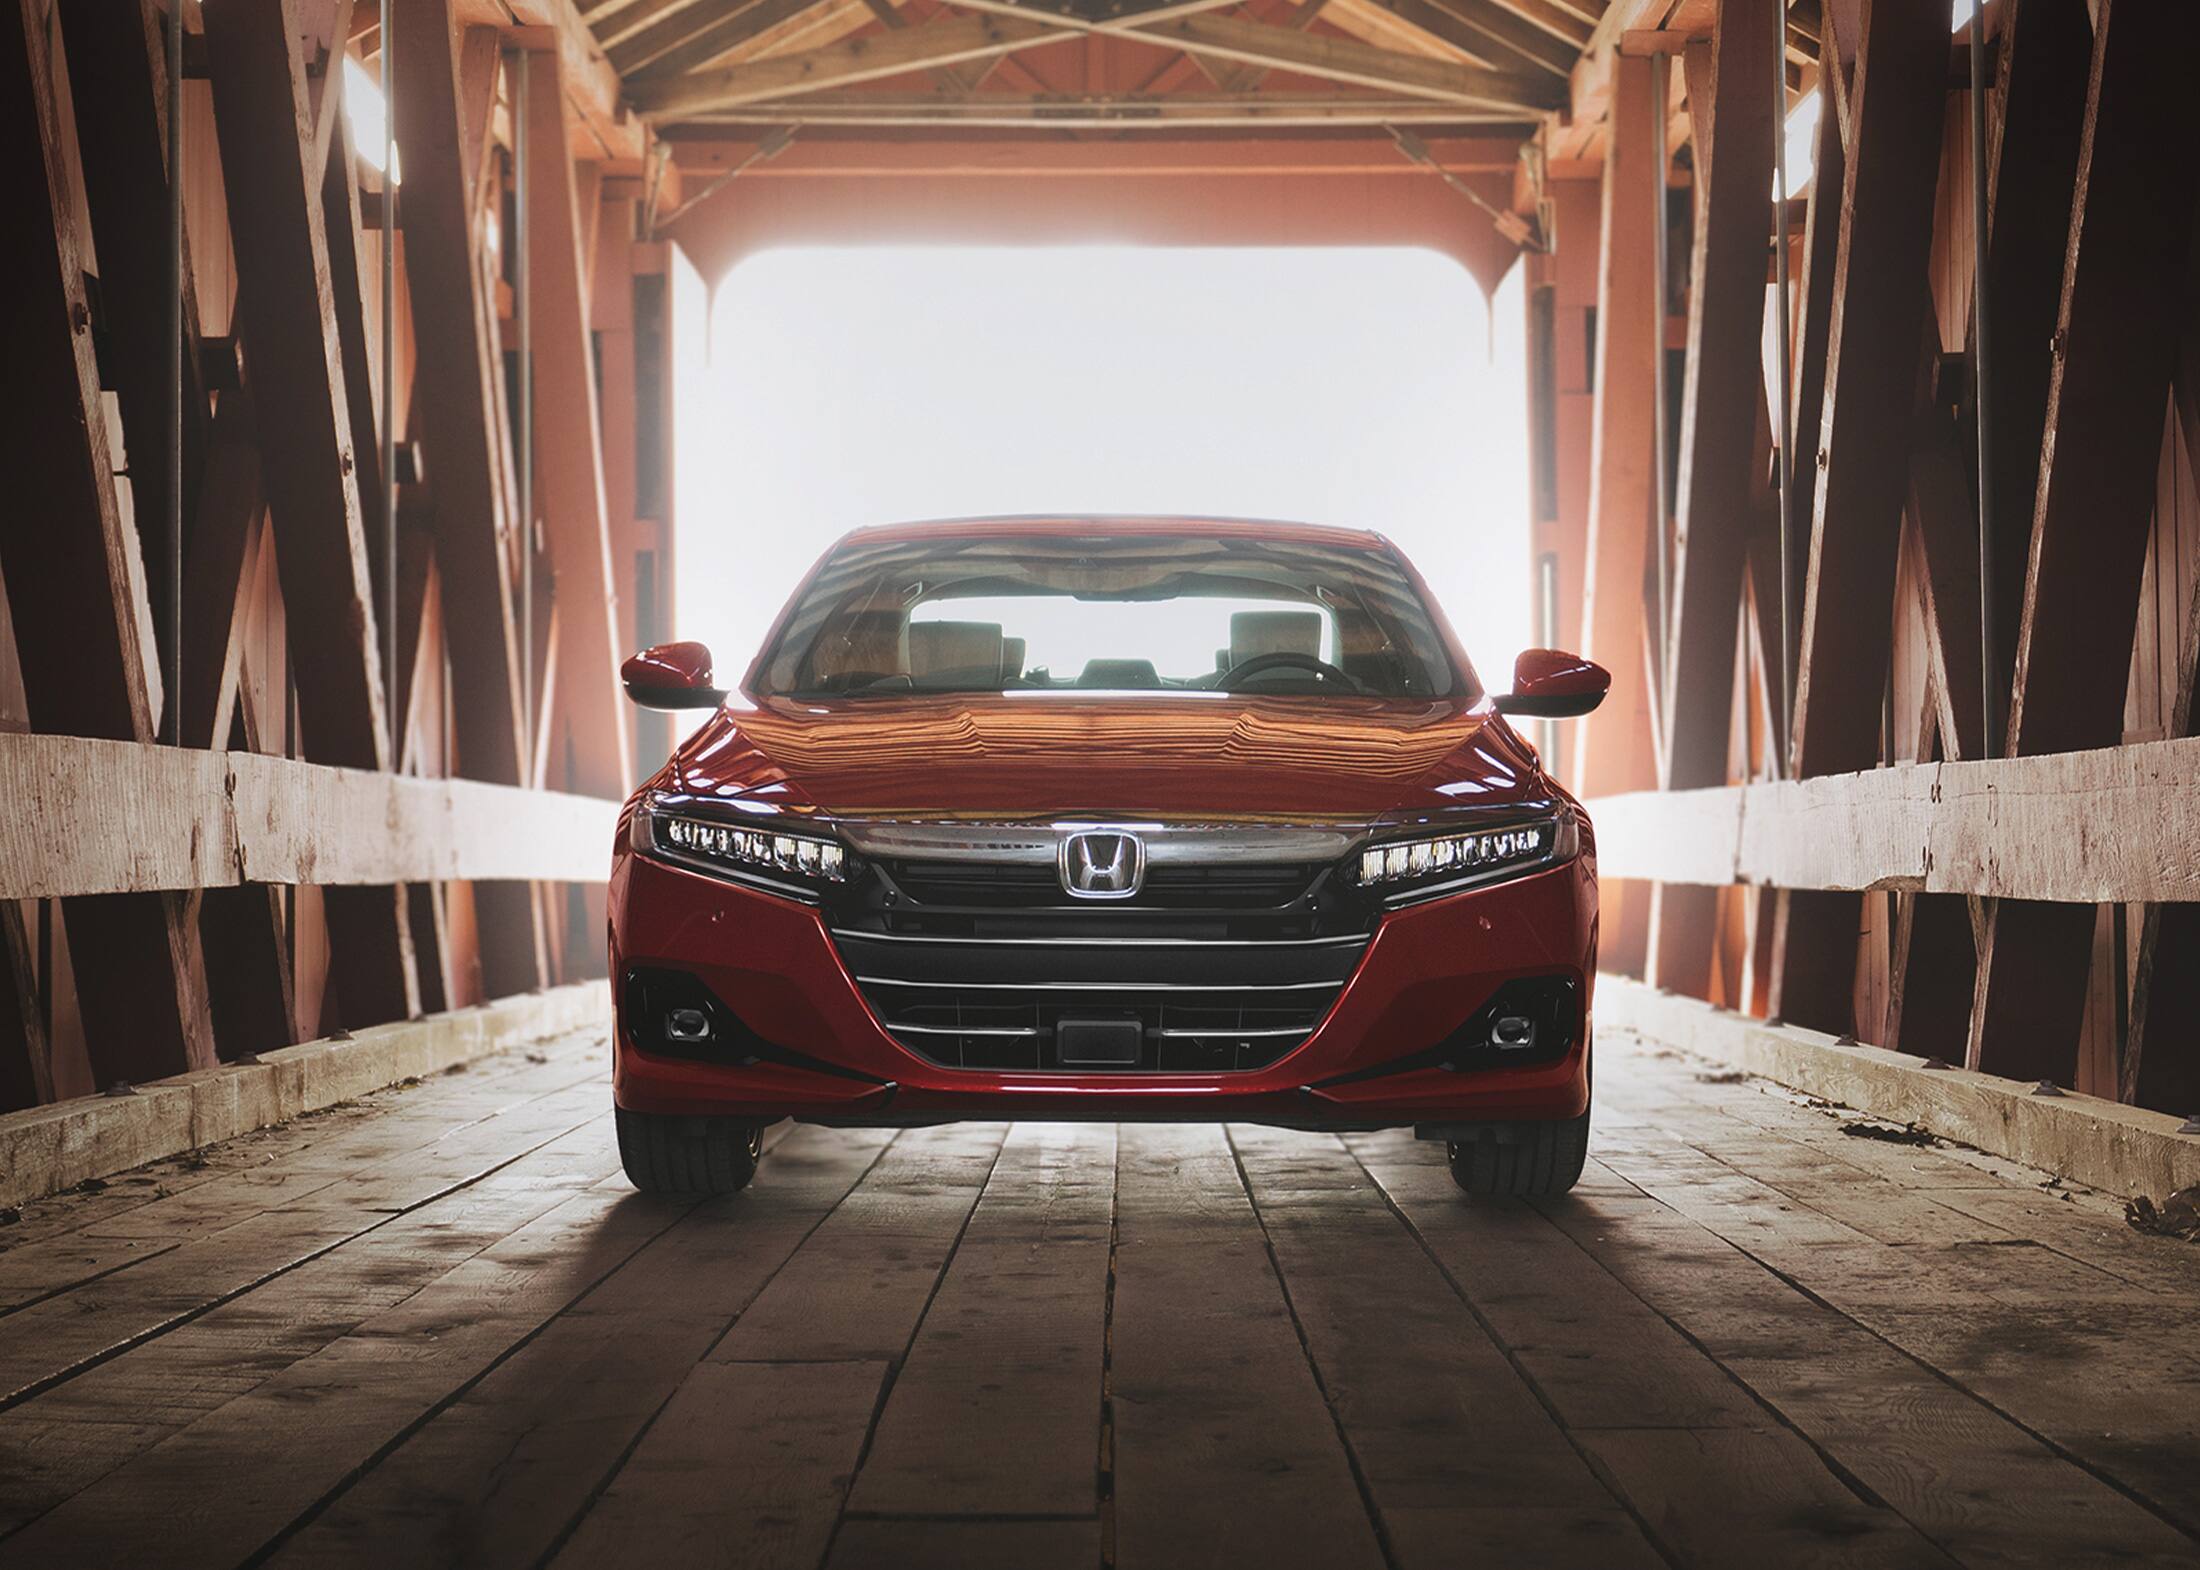 Front view of the 2022 Accord Touring 2.0T, shown in Radiant Red Metallic, parked on a wooden covered bridge with sunlight streaming in through the entrance.